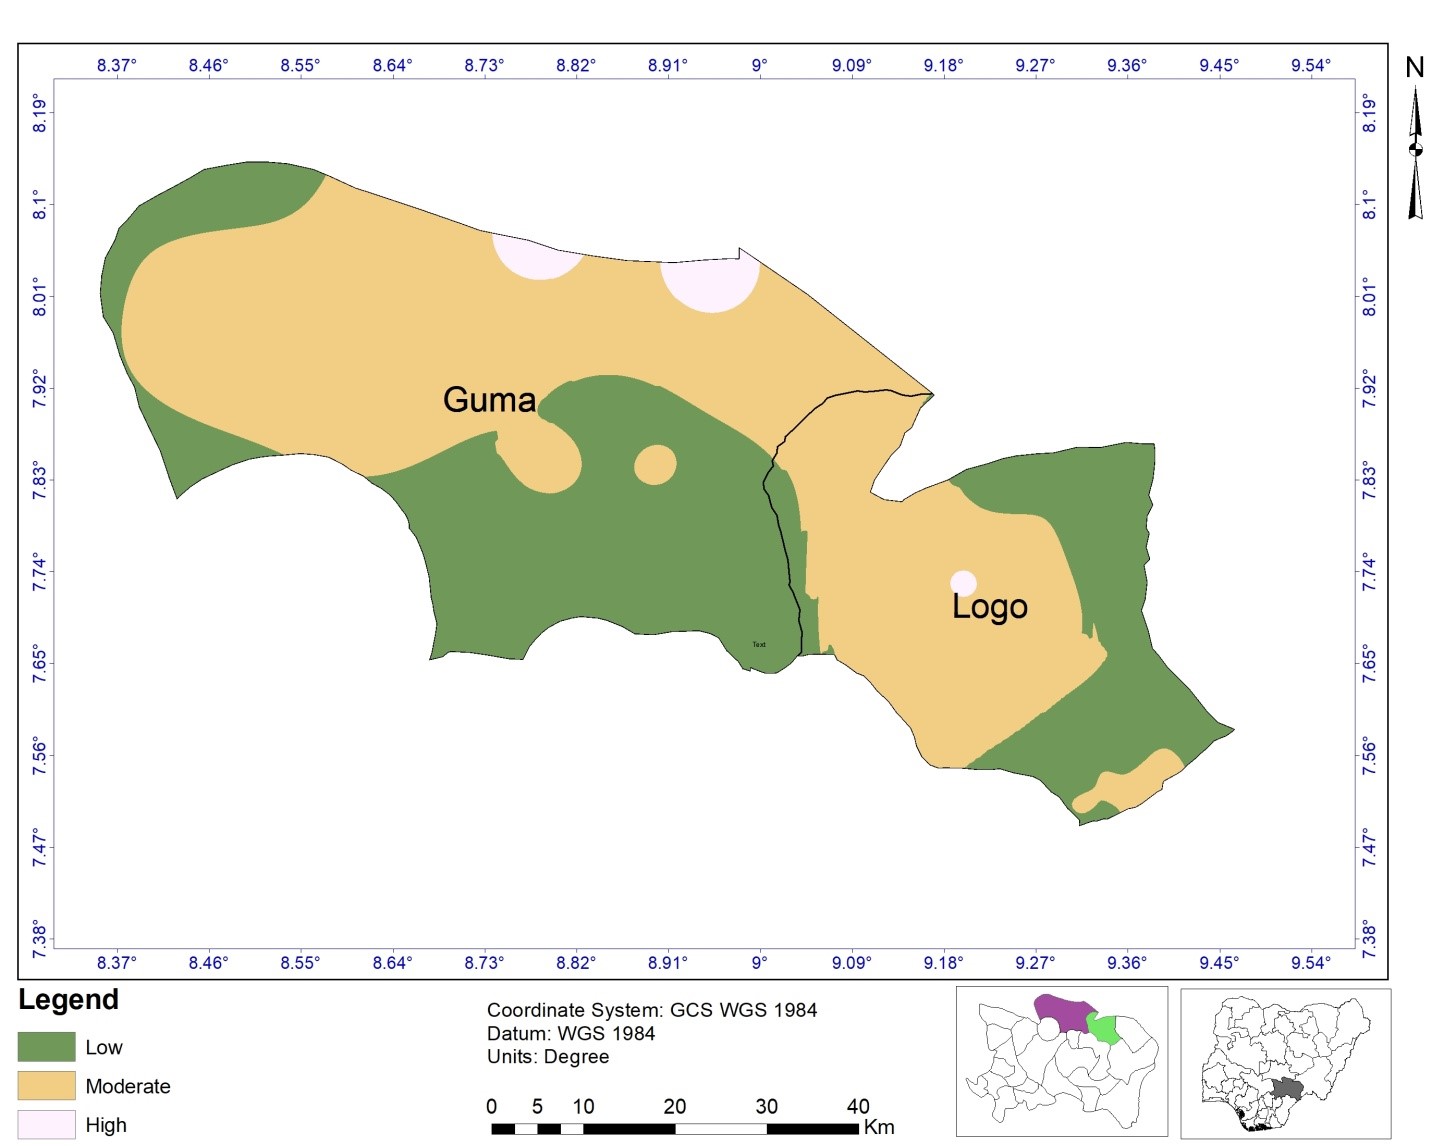 Fatality Rate of Farmers-Herders Conflict in Guma and Logo LGAs